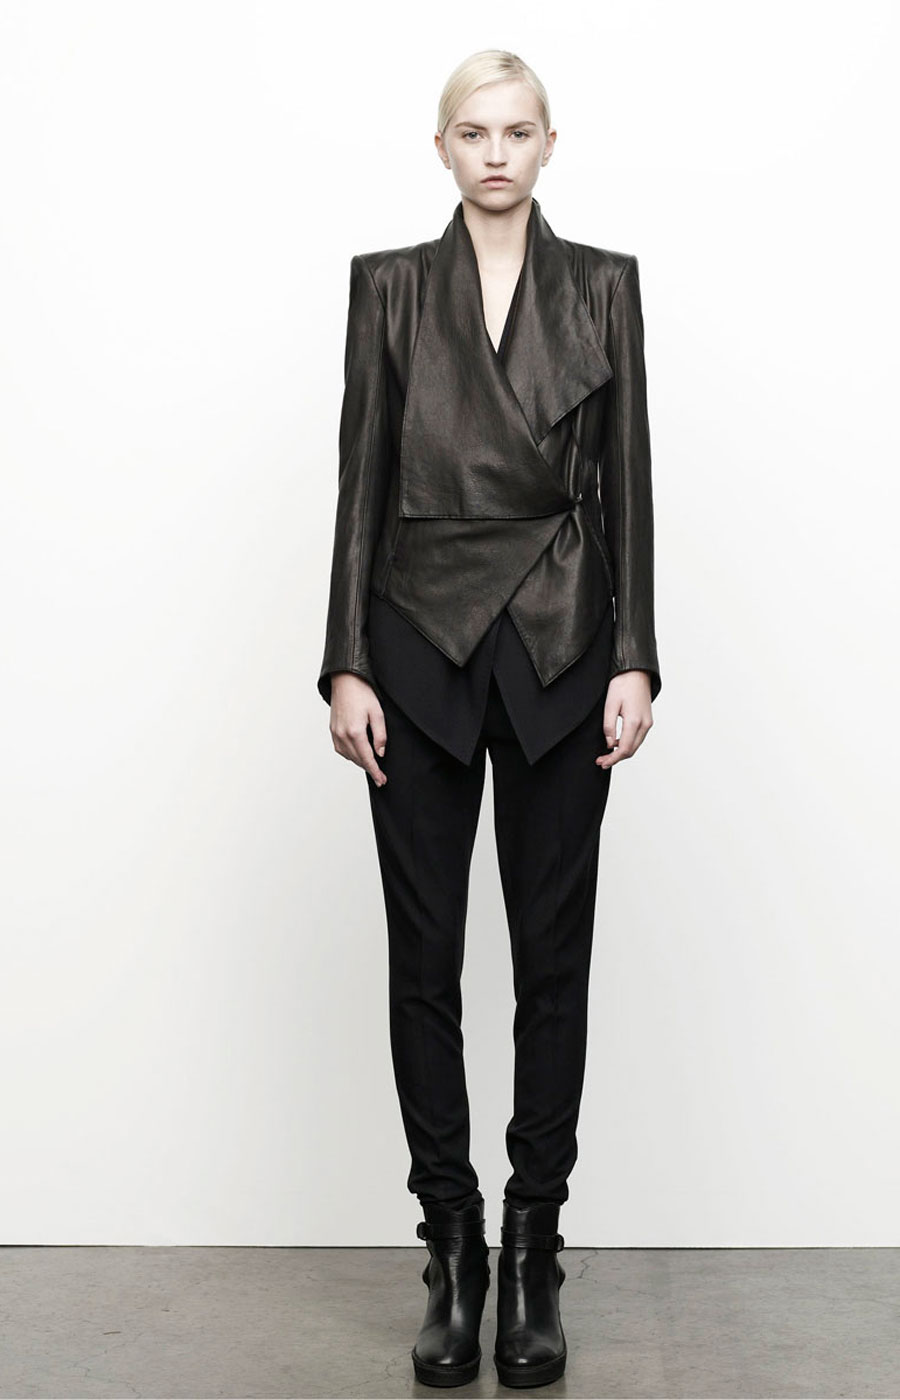 Pre-Fall 2012/2013 by Helmut Lang (18)